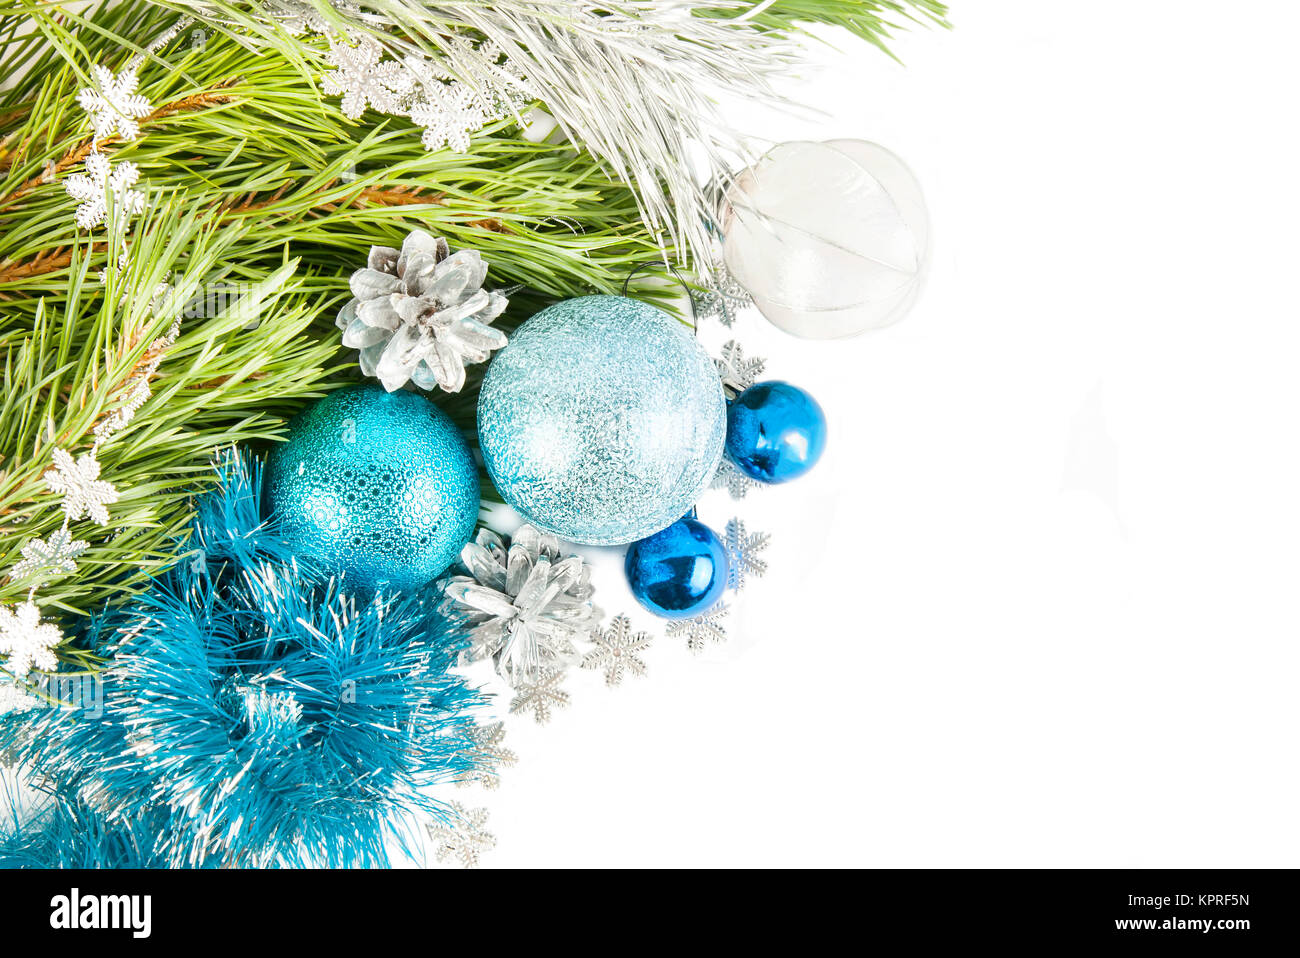 New Year composition with fir tree branch and cones with blue balls and tinsel isolated on white background Stock Photo